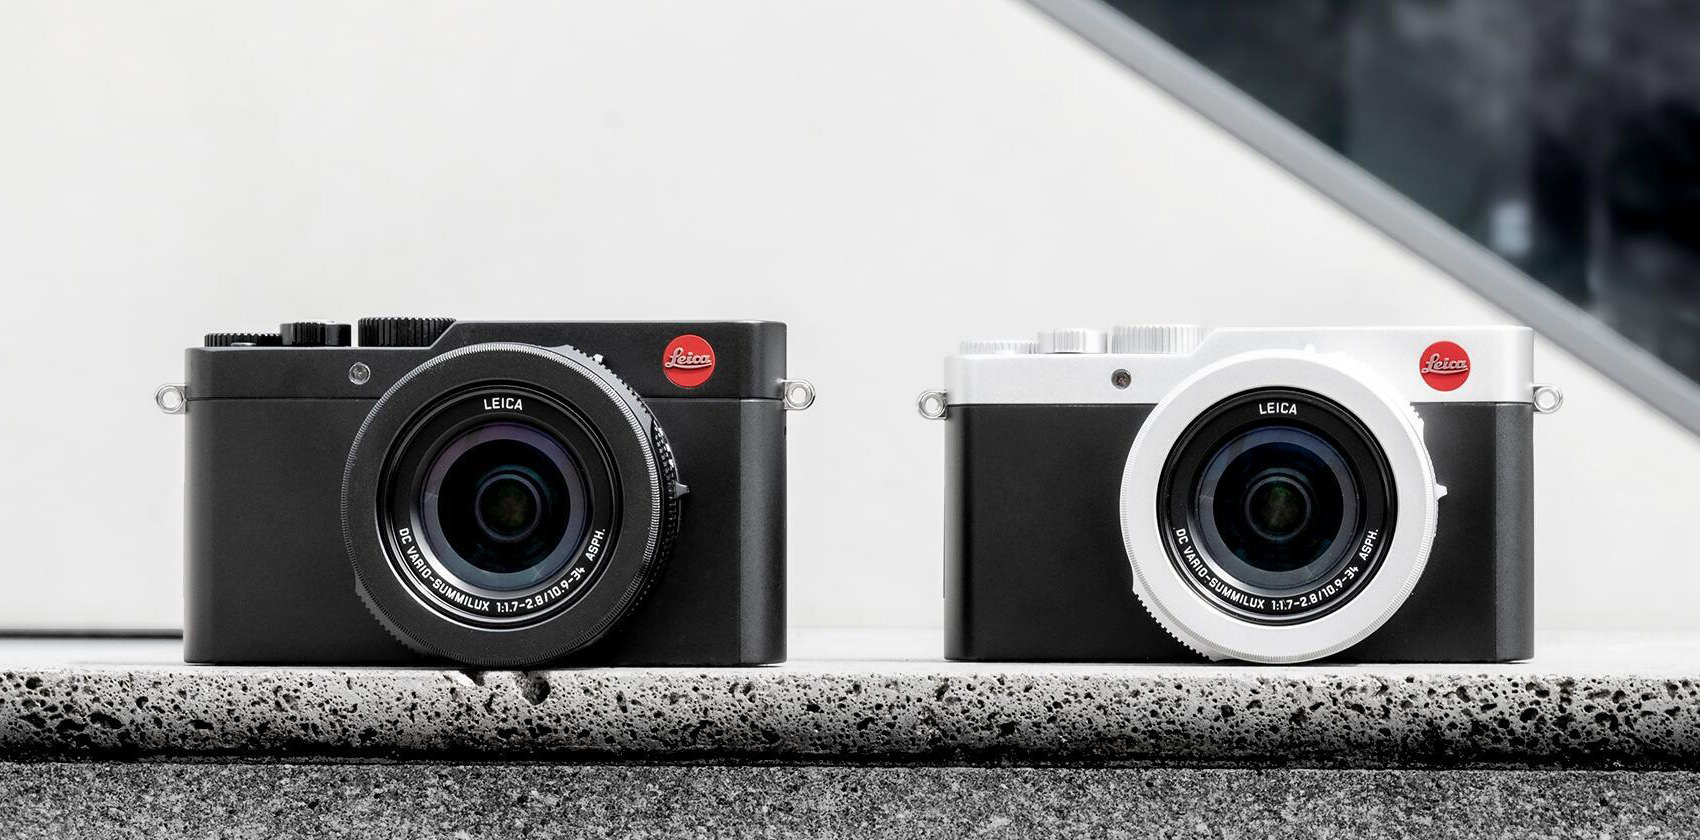 Leica Unveils a New Black Version of the D-Lux 7 Camera - Exibart Street